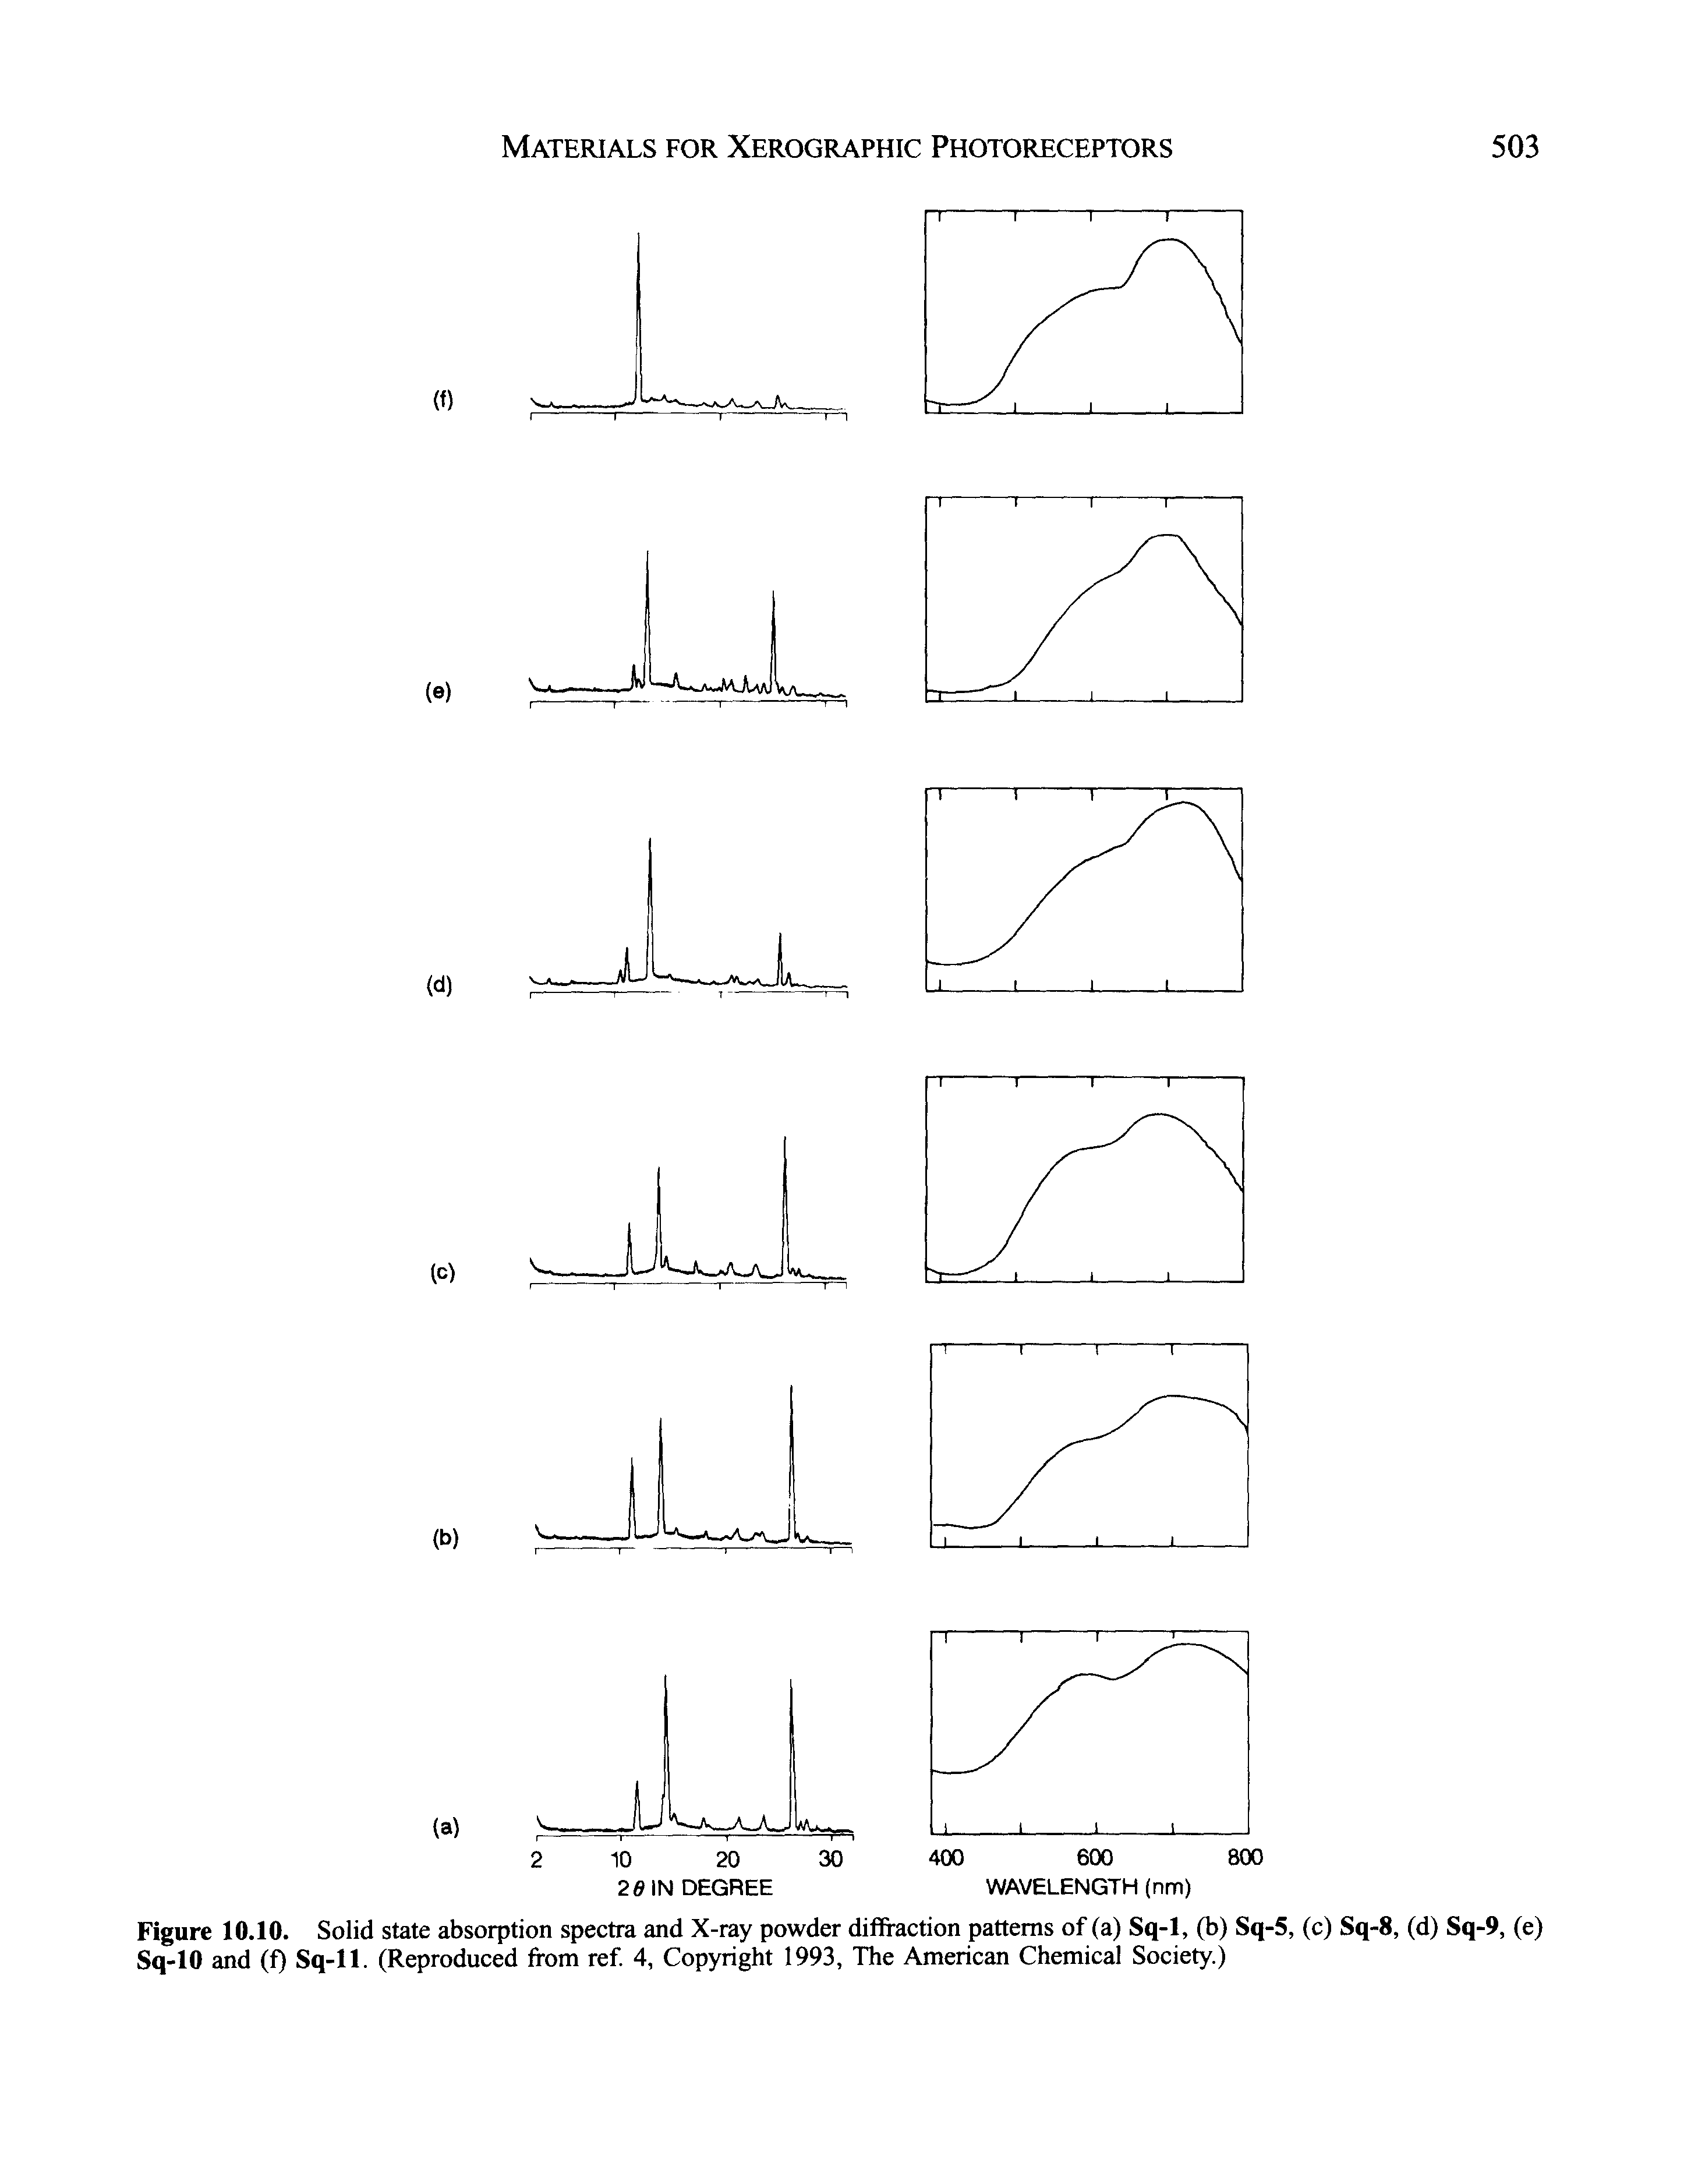 Figure 10.10. Solid state absorption spectra and X-ray powder difiraction patterns of (a) Sq-1, (b) Sq-5, (c) Sq-8, (d) Sq-9, (e) Sq-10 and (f) Sq-11. (Reproduced from ref 4, Copyright 1993, The American Chemical Society.)...